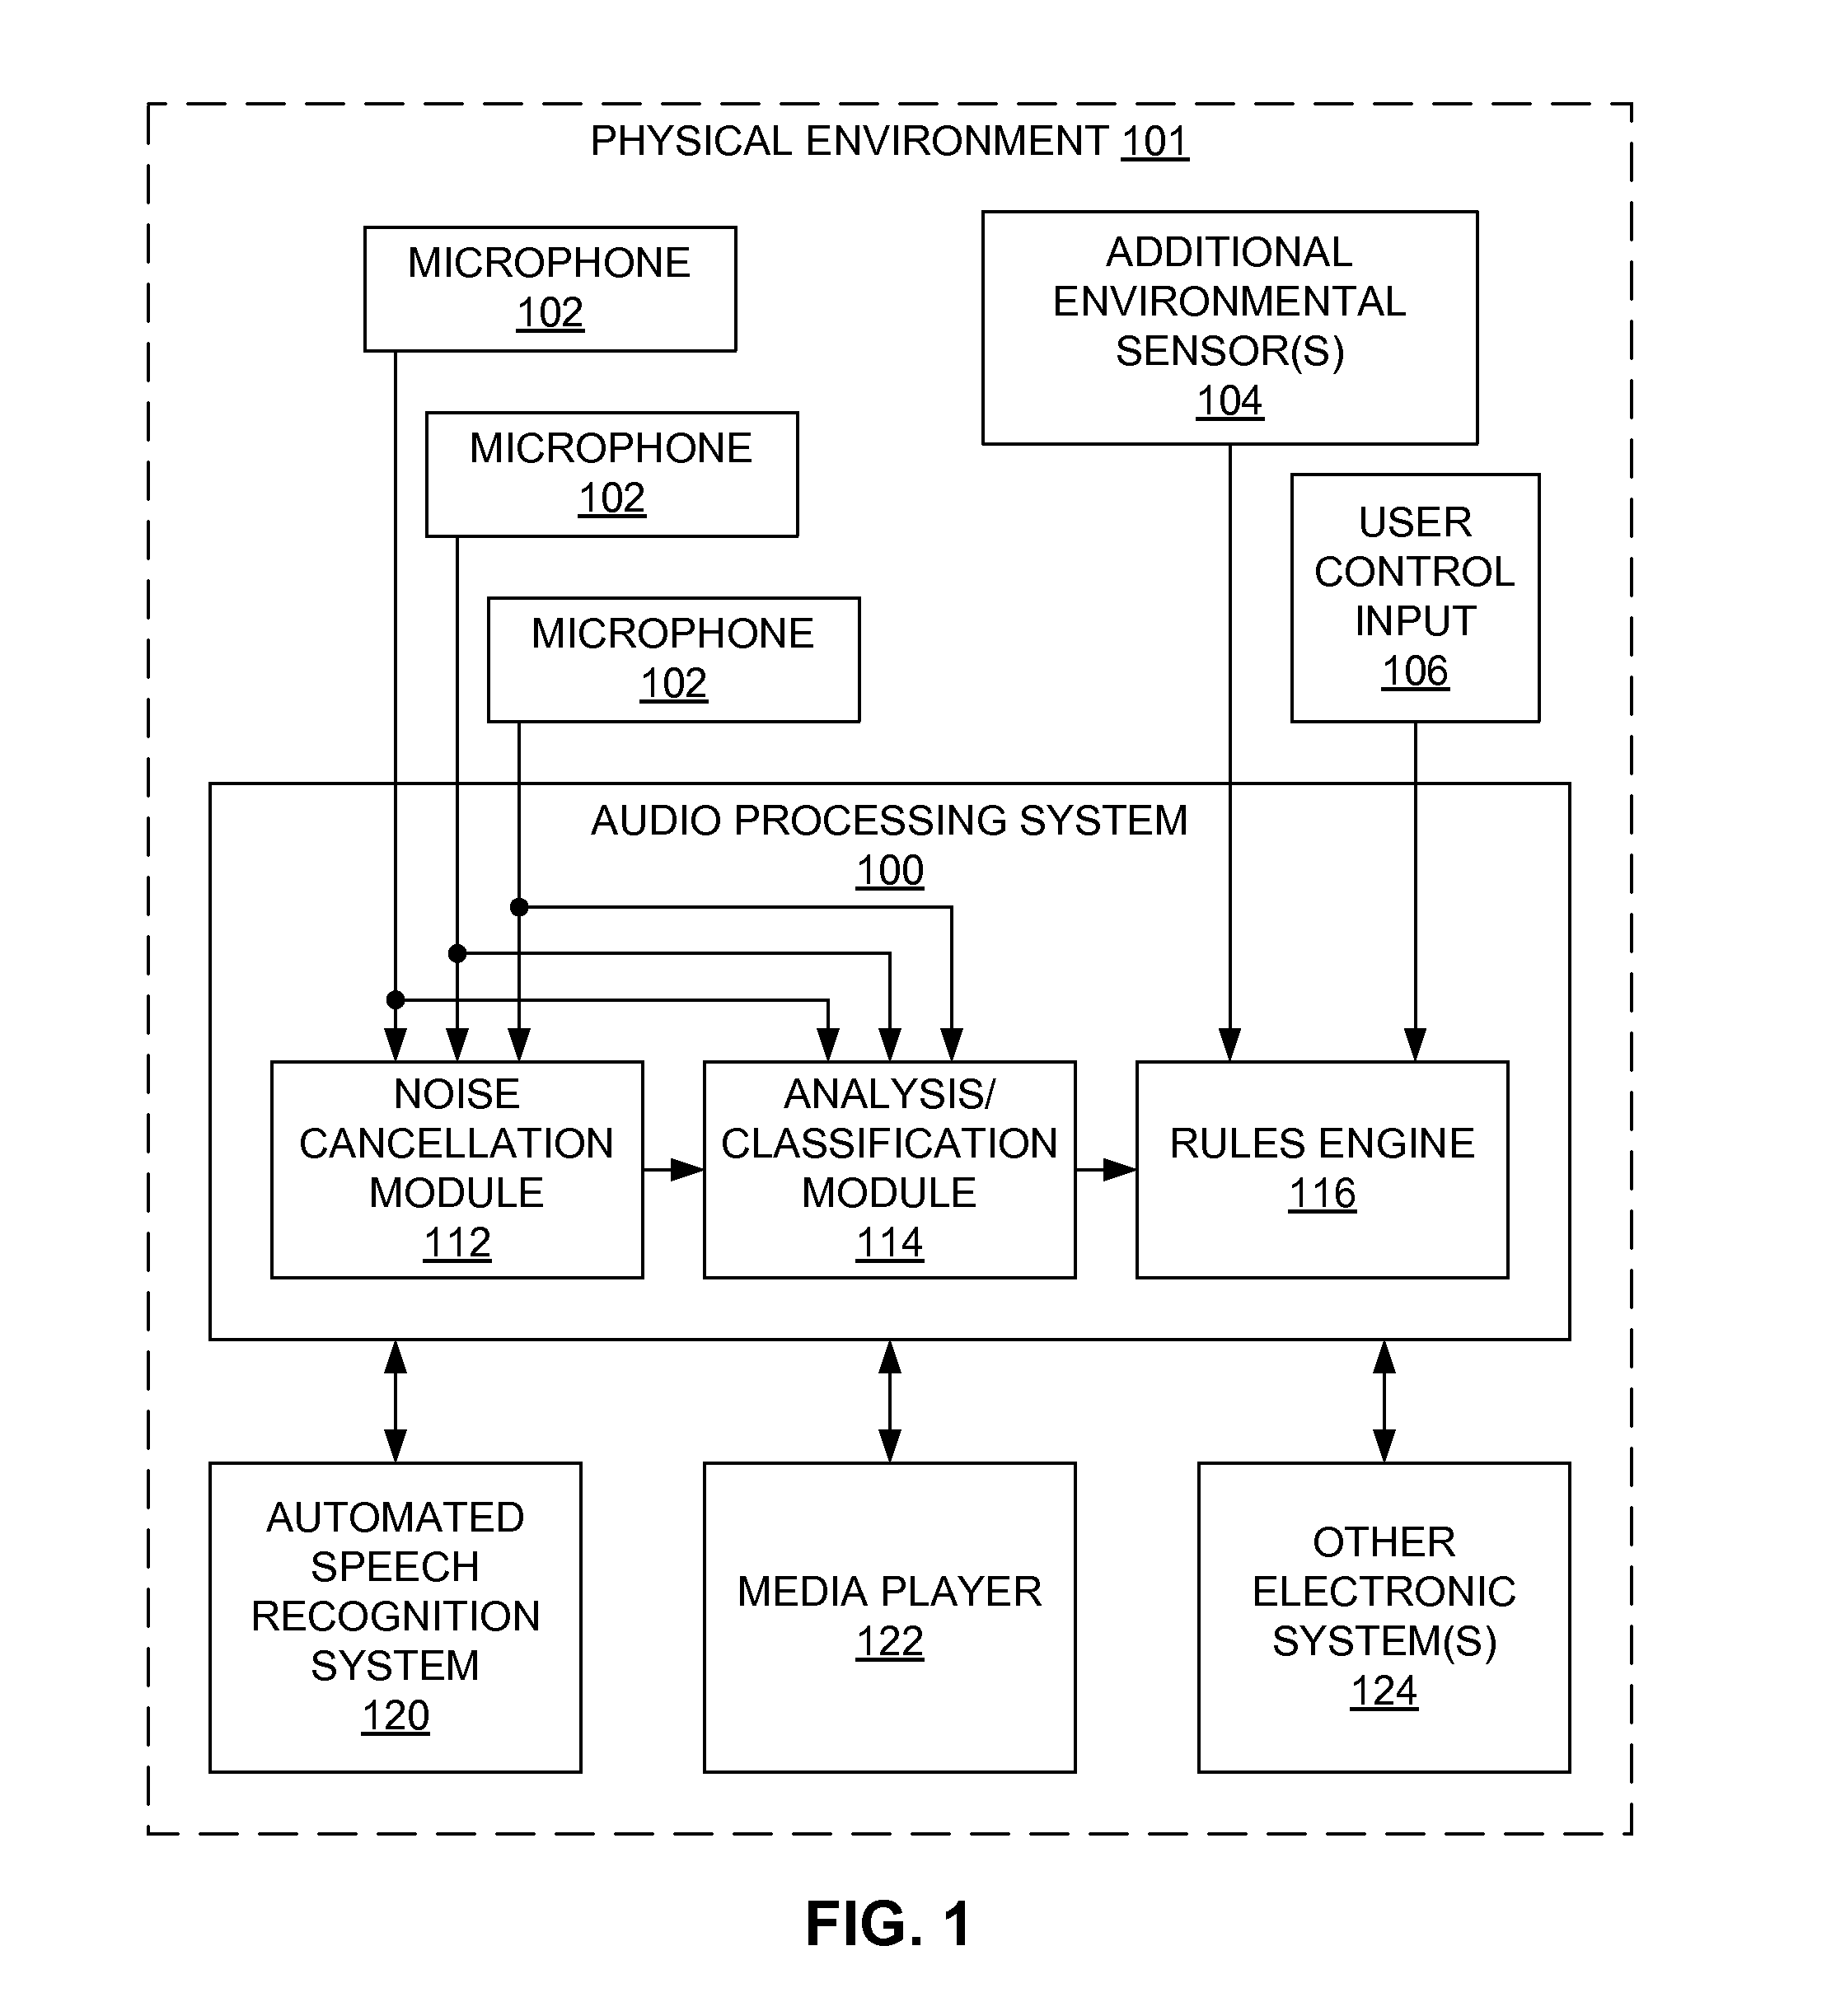 Modification of electronic system operation based on acoustic ambience classification